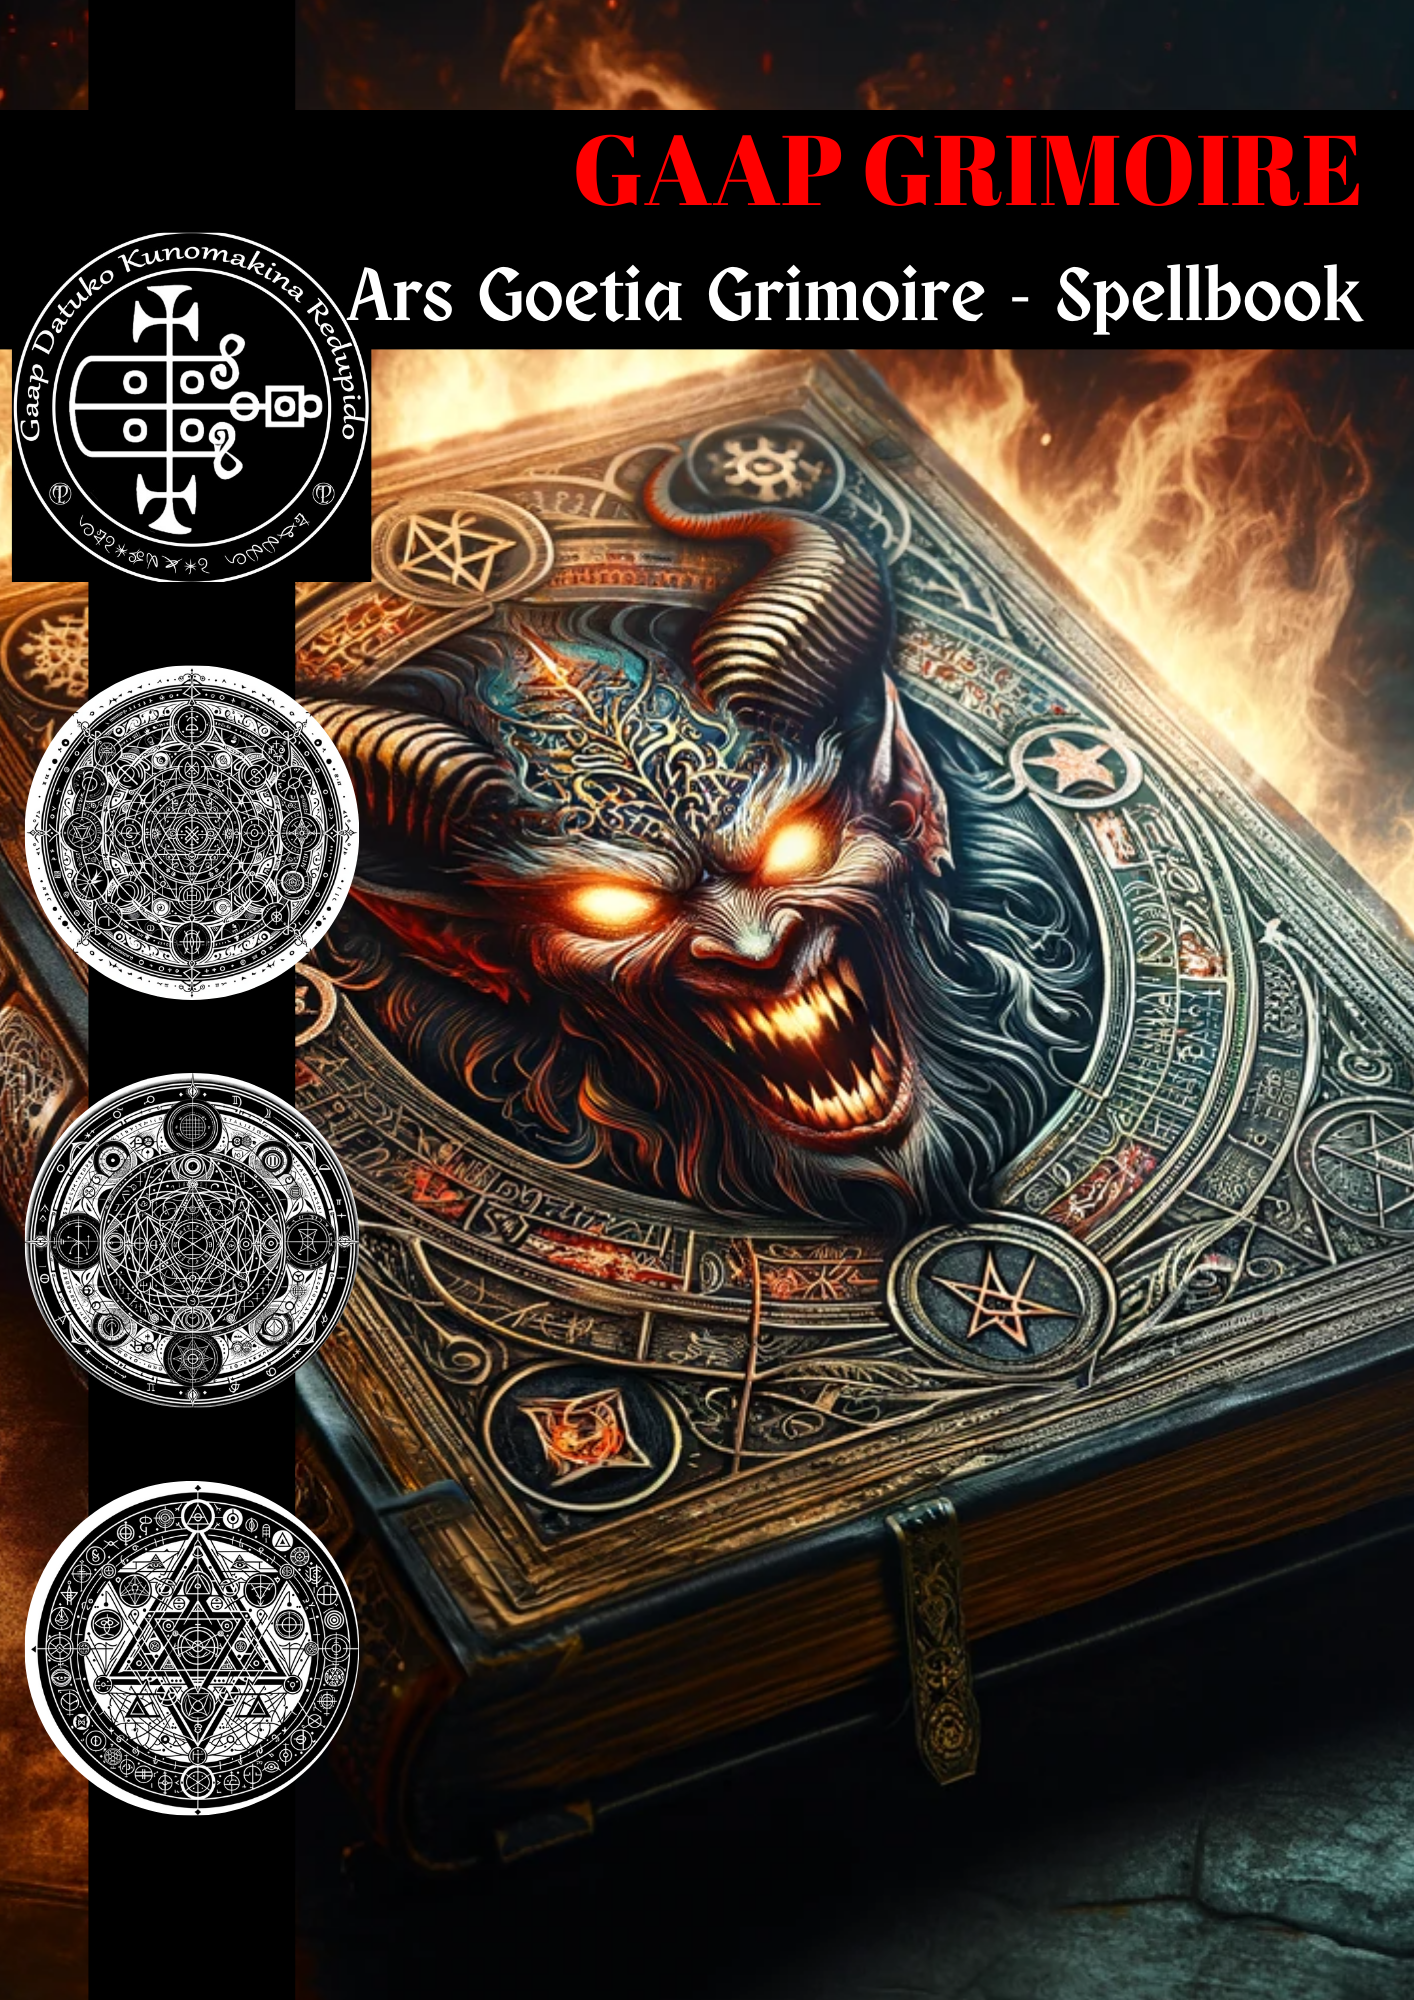 ʻO Grimoire o Gaap Spells & Rituals for Lucid Dreaming and Dream Explanation - Abraxas Amulets ® Magic ♾️ Talismans ♾️ Initiations